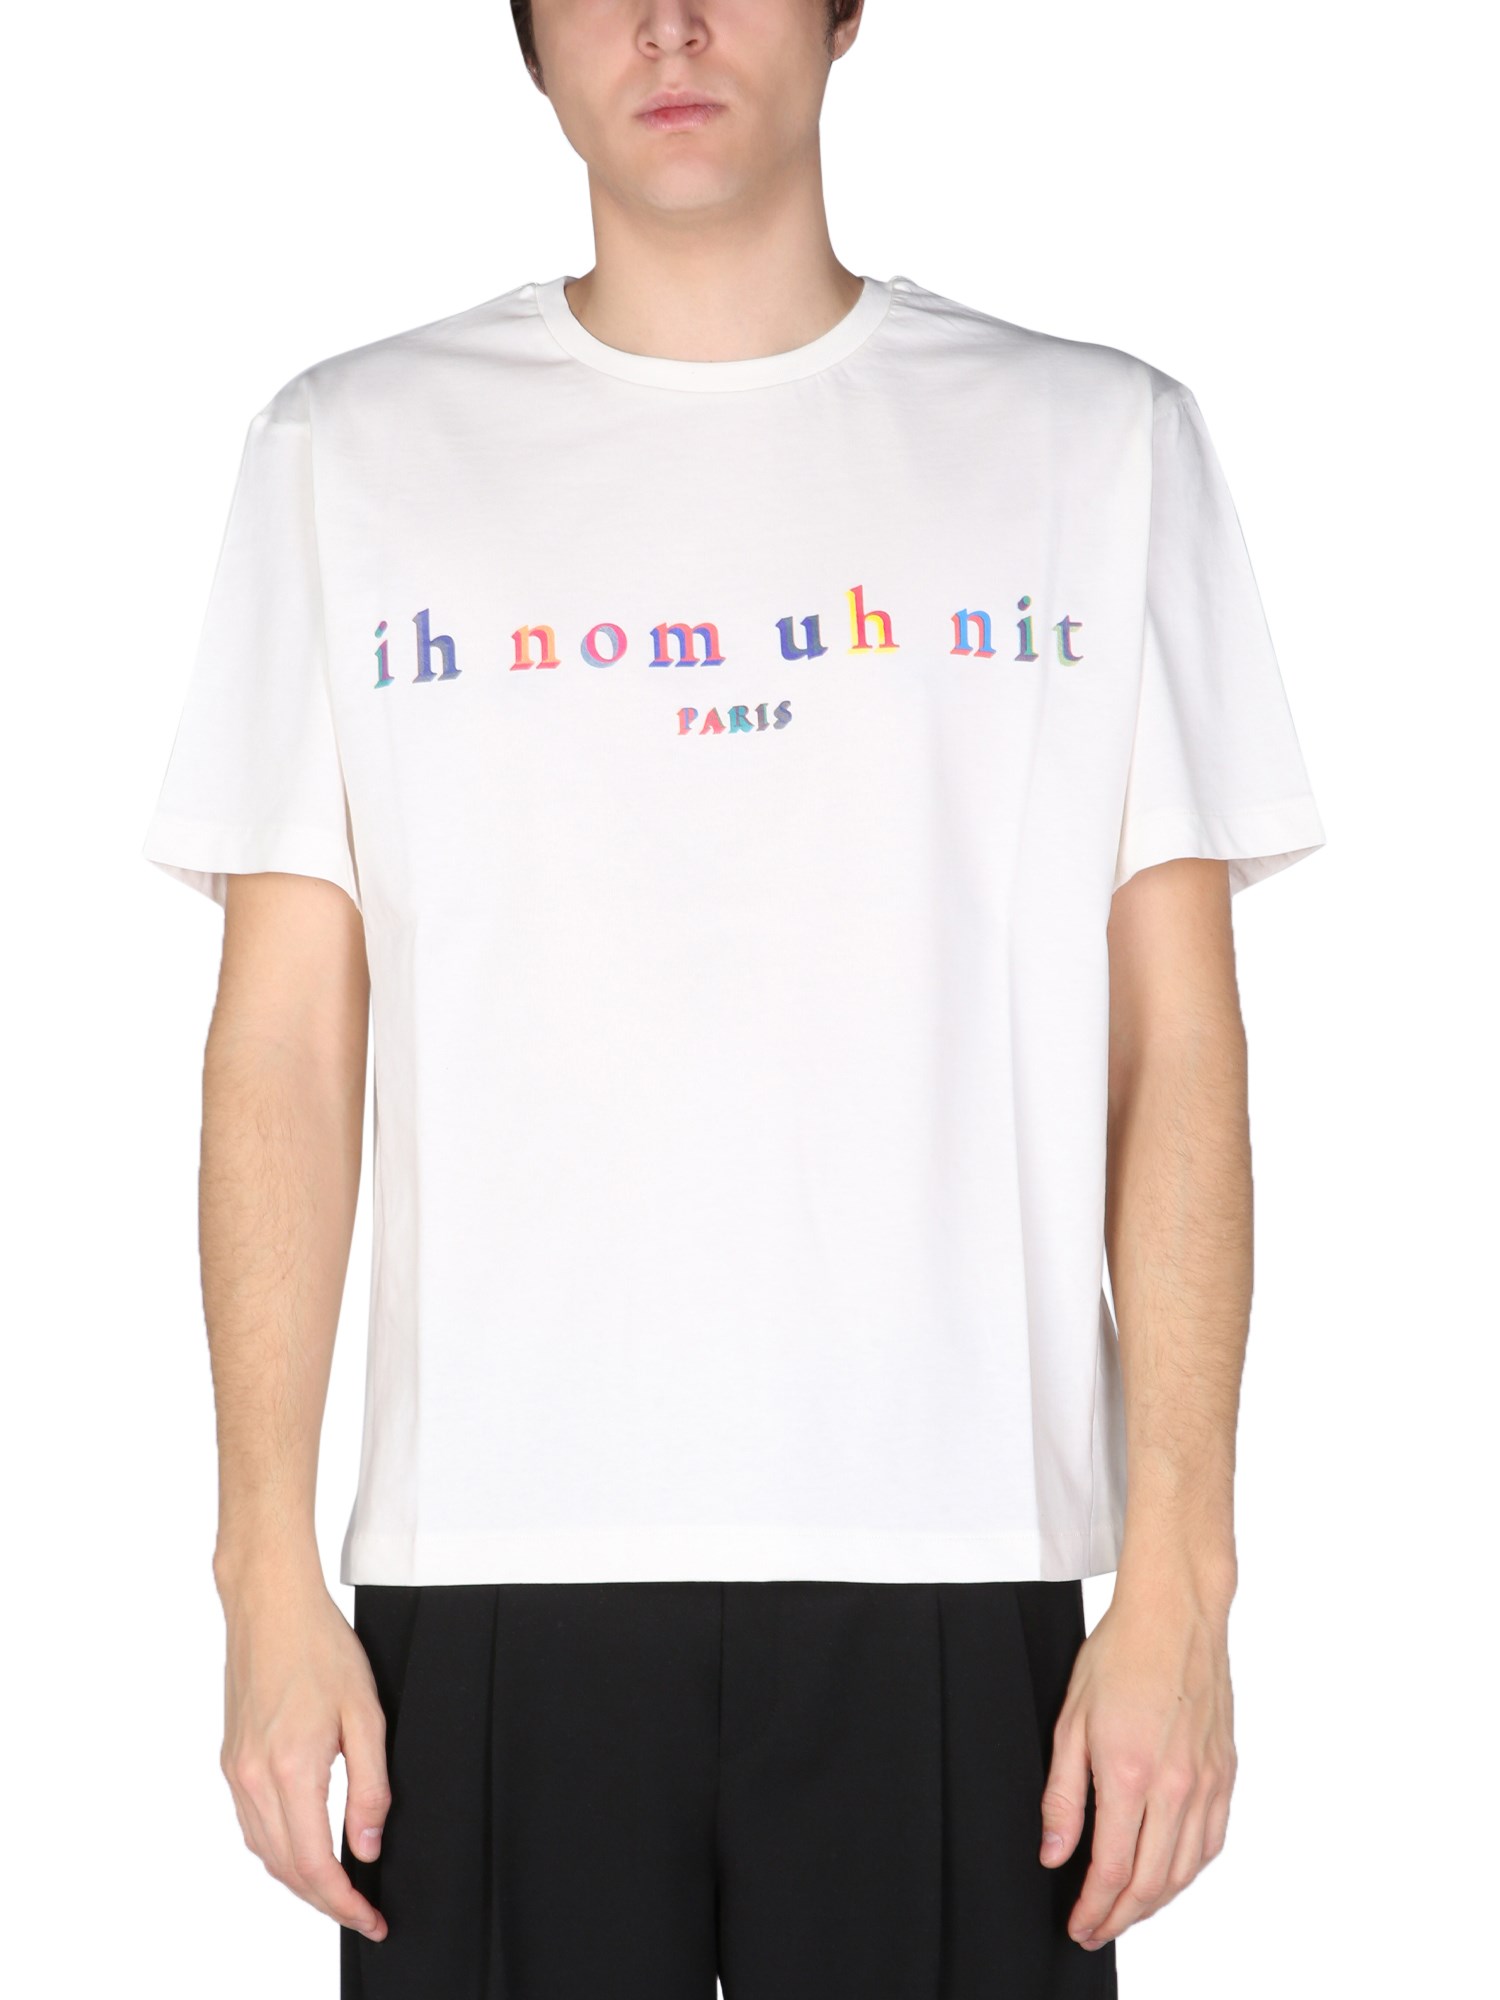 ih nom uh nit relaxed fit t-shirt